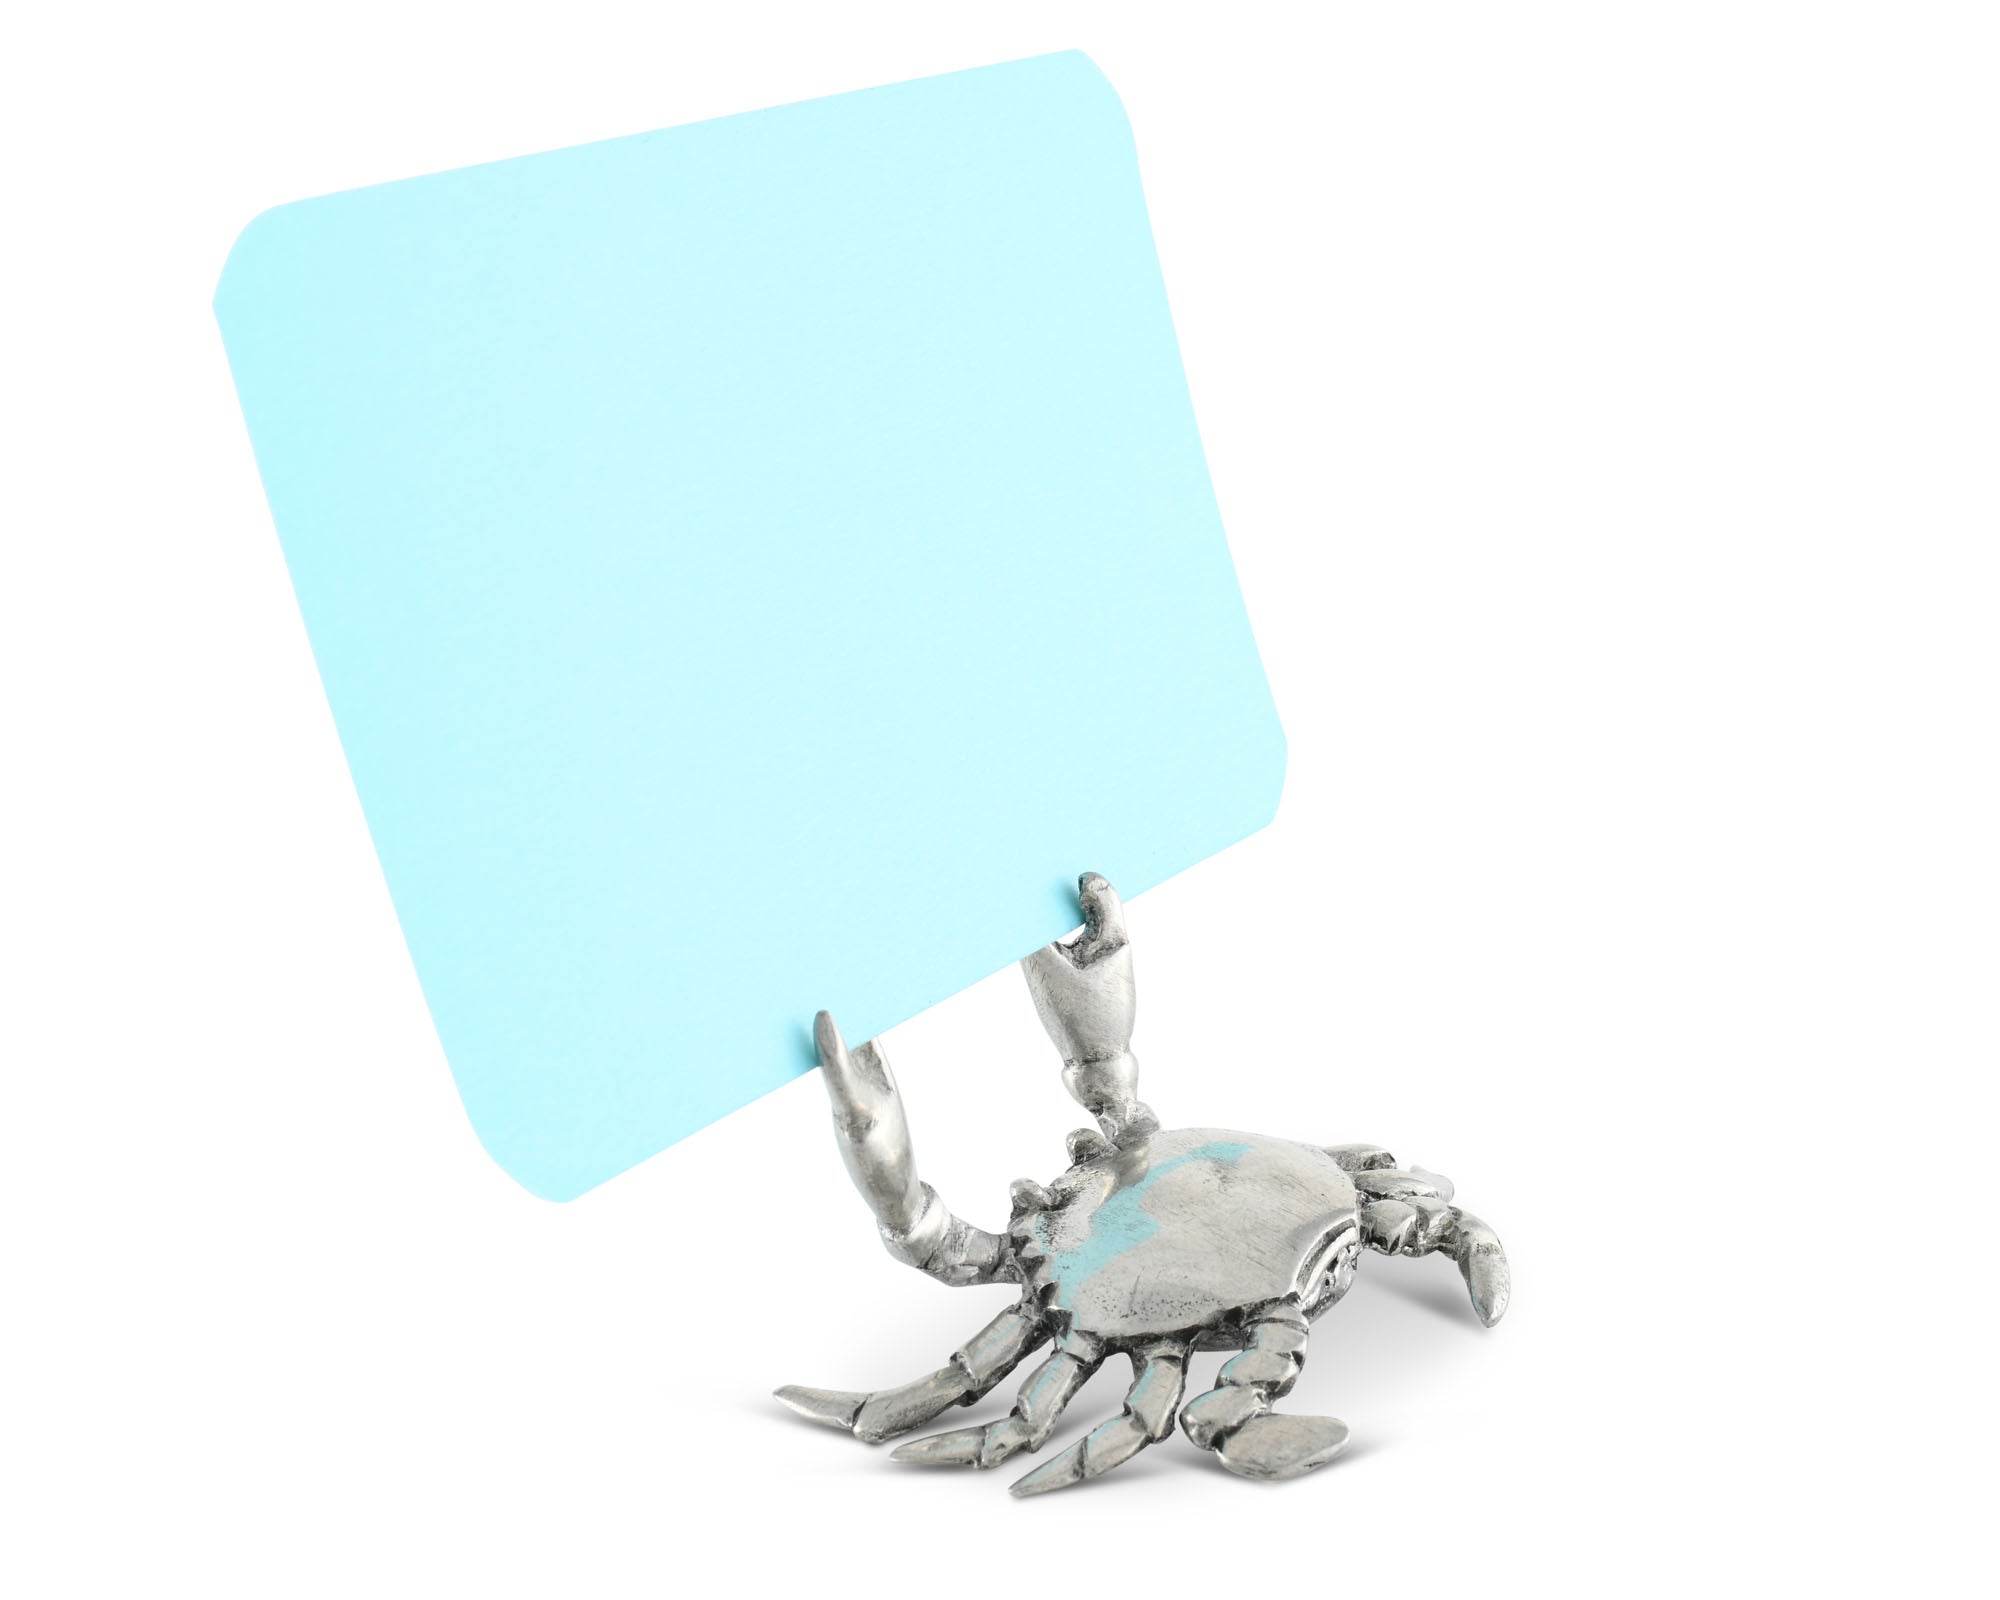 Vagabond House Pewter Crab Place Card Holder Product Image